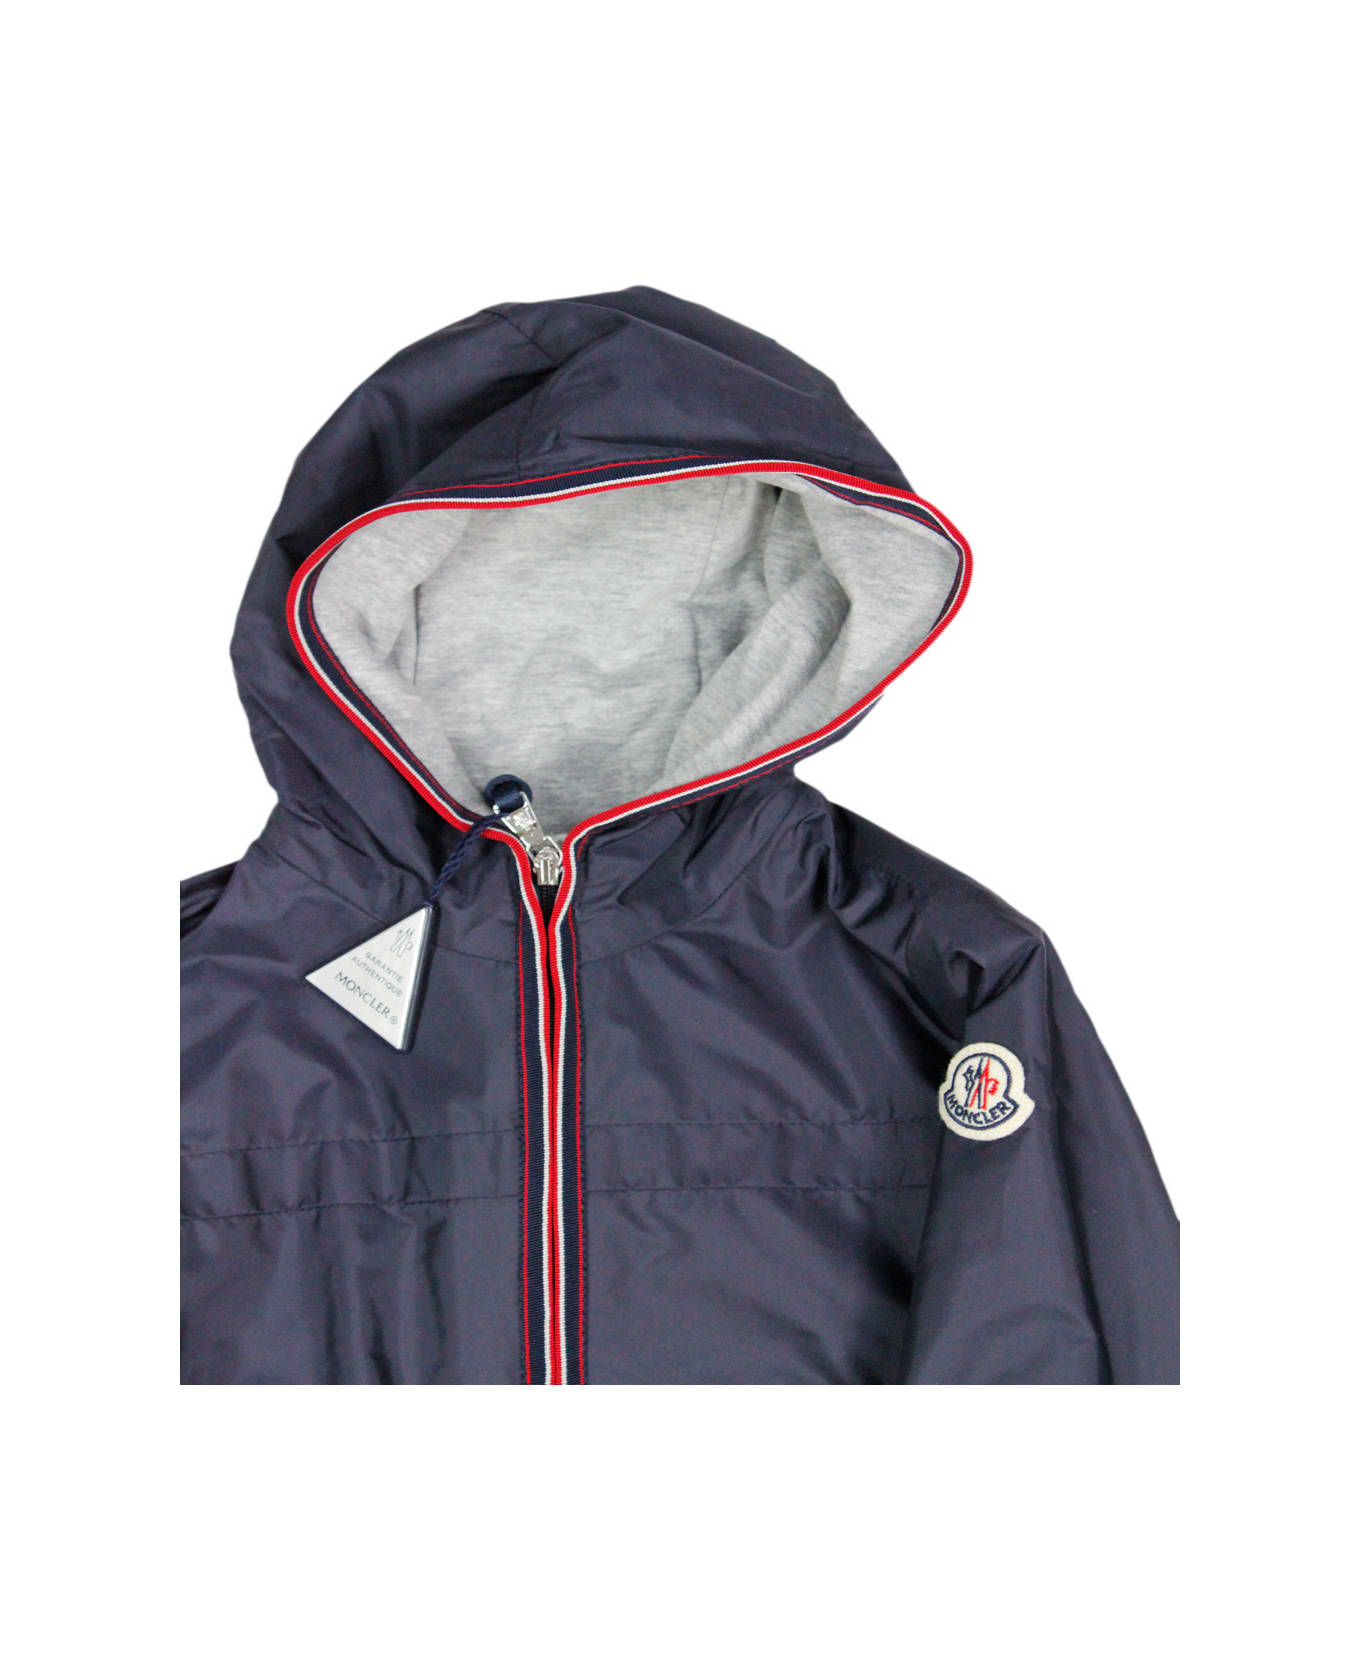 Moncler Windproof Jacket In Technical Fabric With Hood And Cotton Lining. Colored Profile On The Zip And Hood - Blu